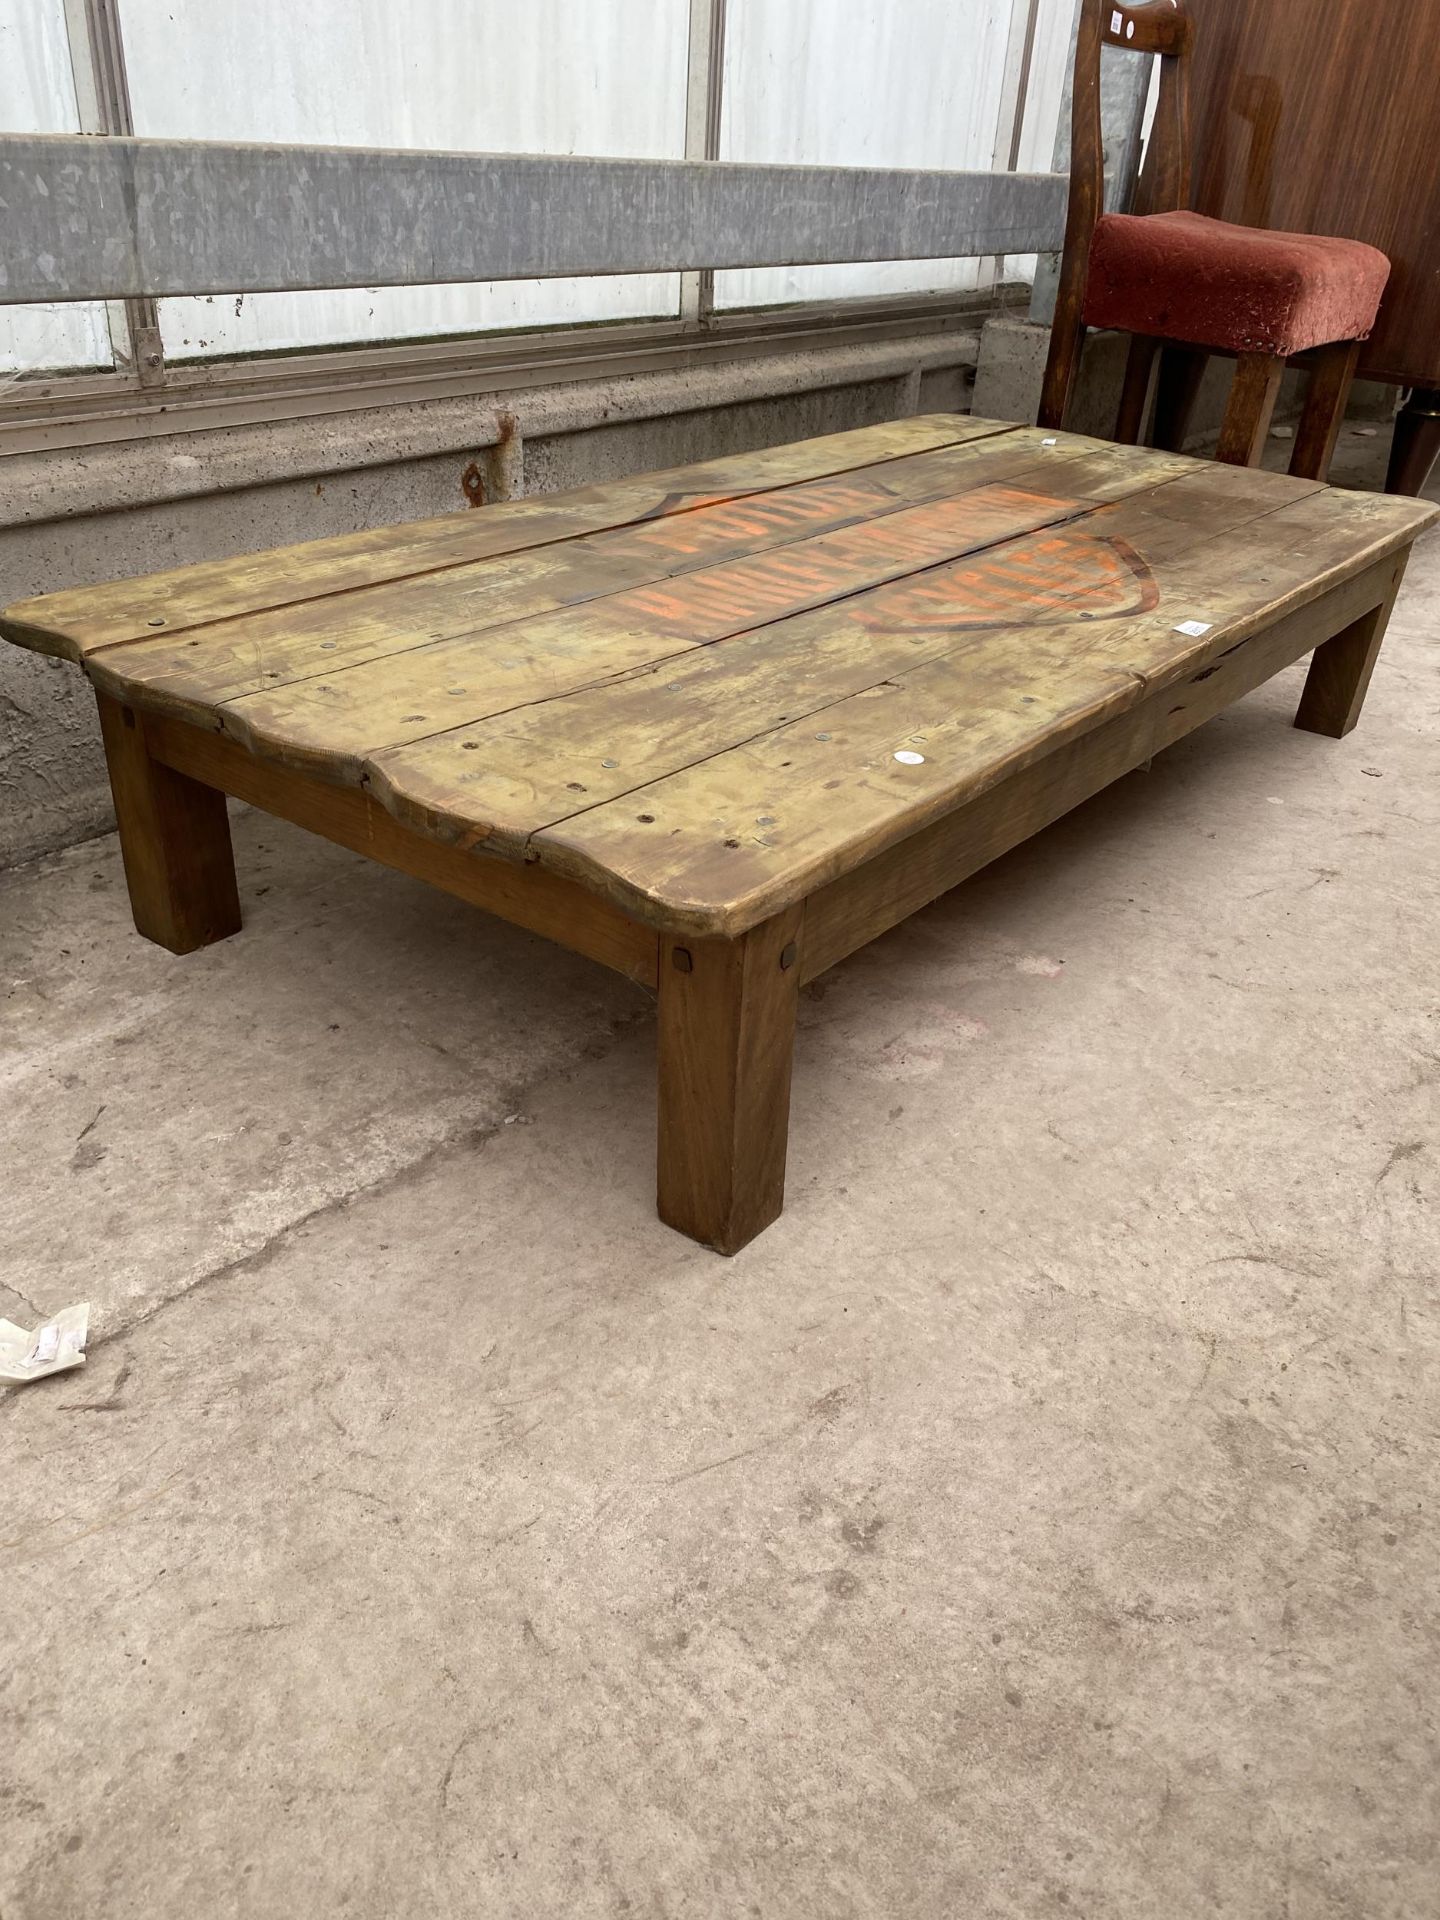 A RUSTIC LOW COFFEE TABLE, THE TOP BEARING HARLEY-DAVIDSON MOTORCYCLES LOGO, 56X27" - Image 2 of 3